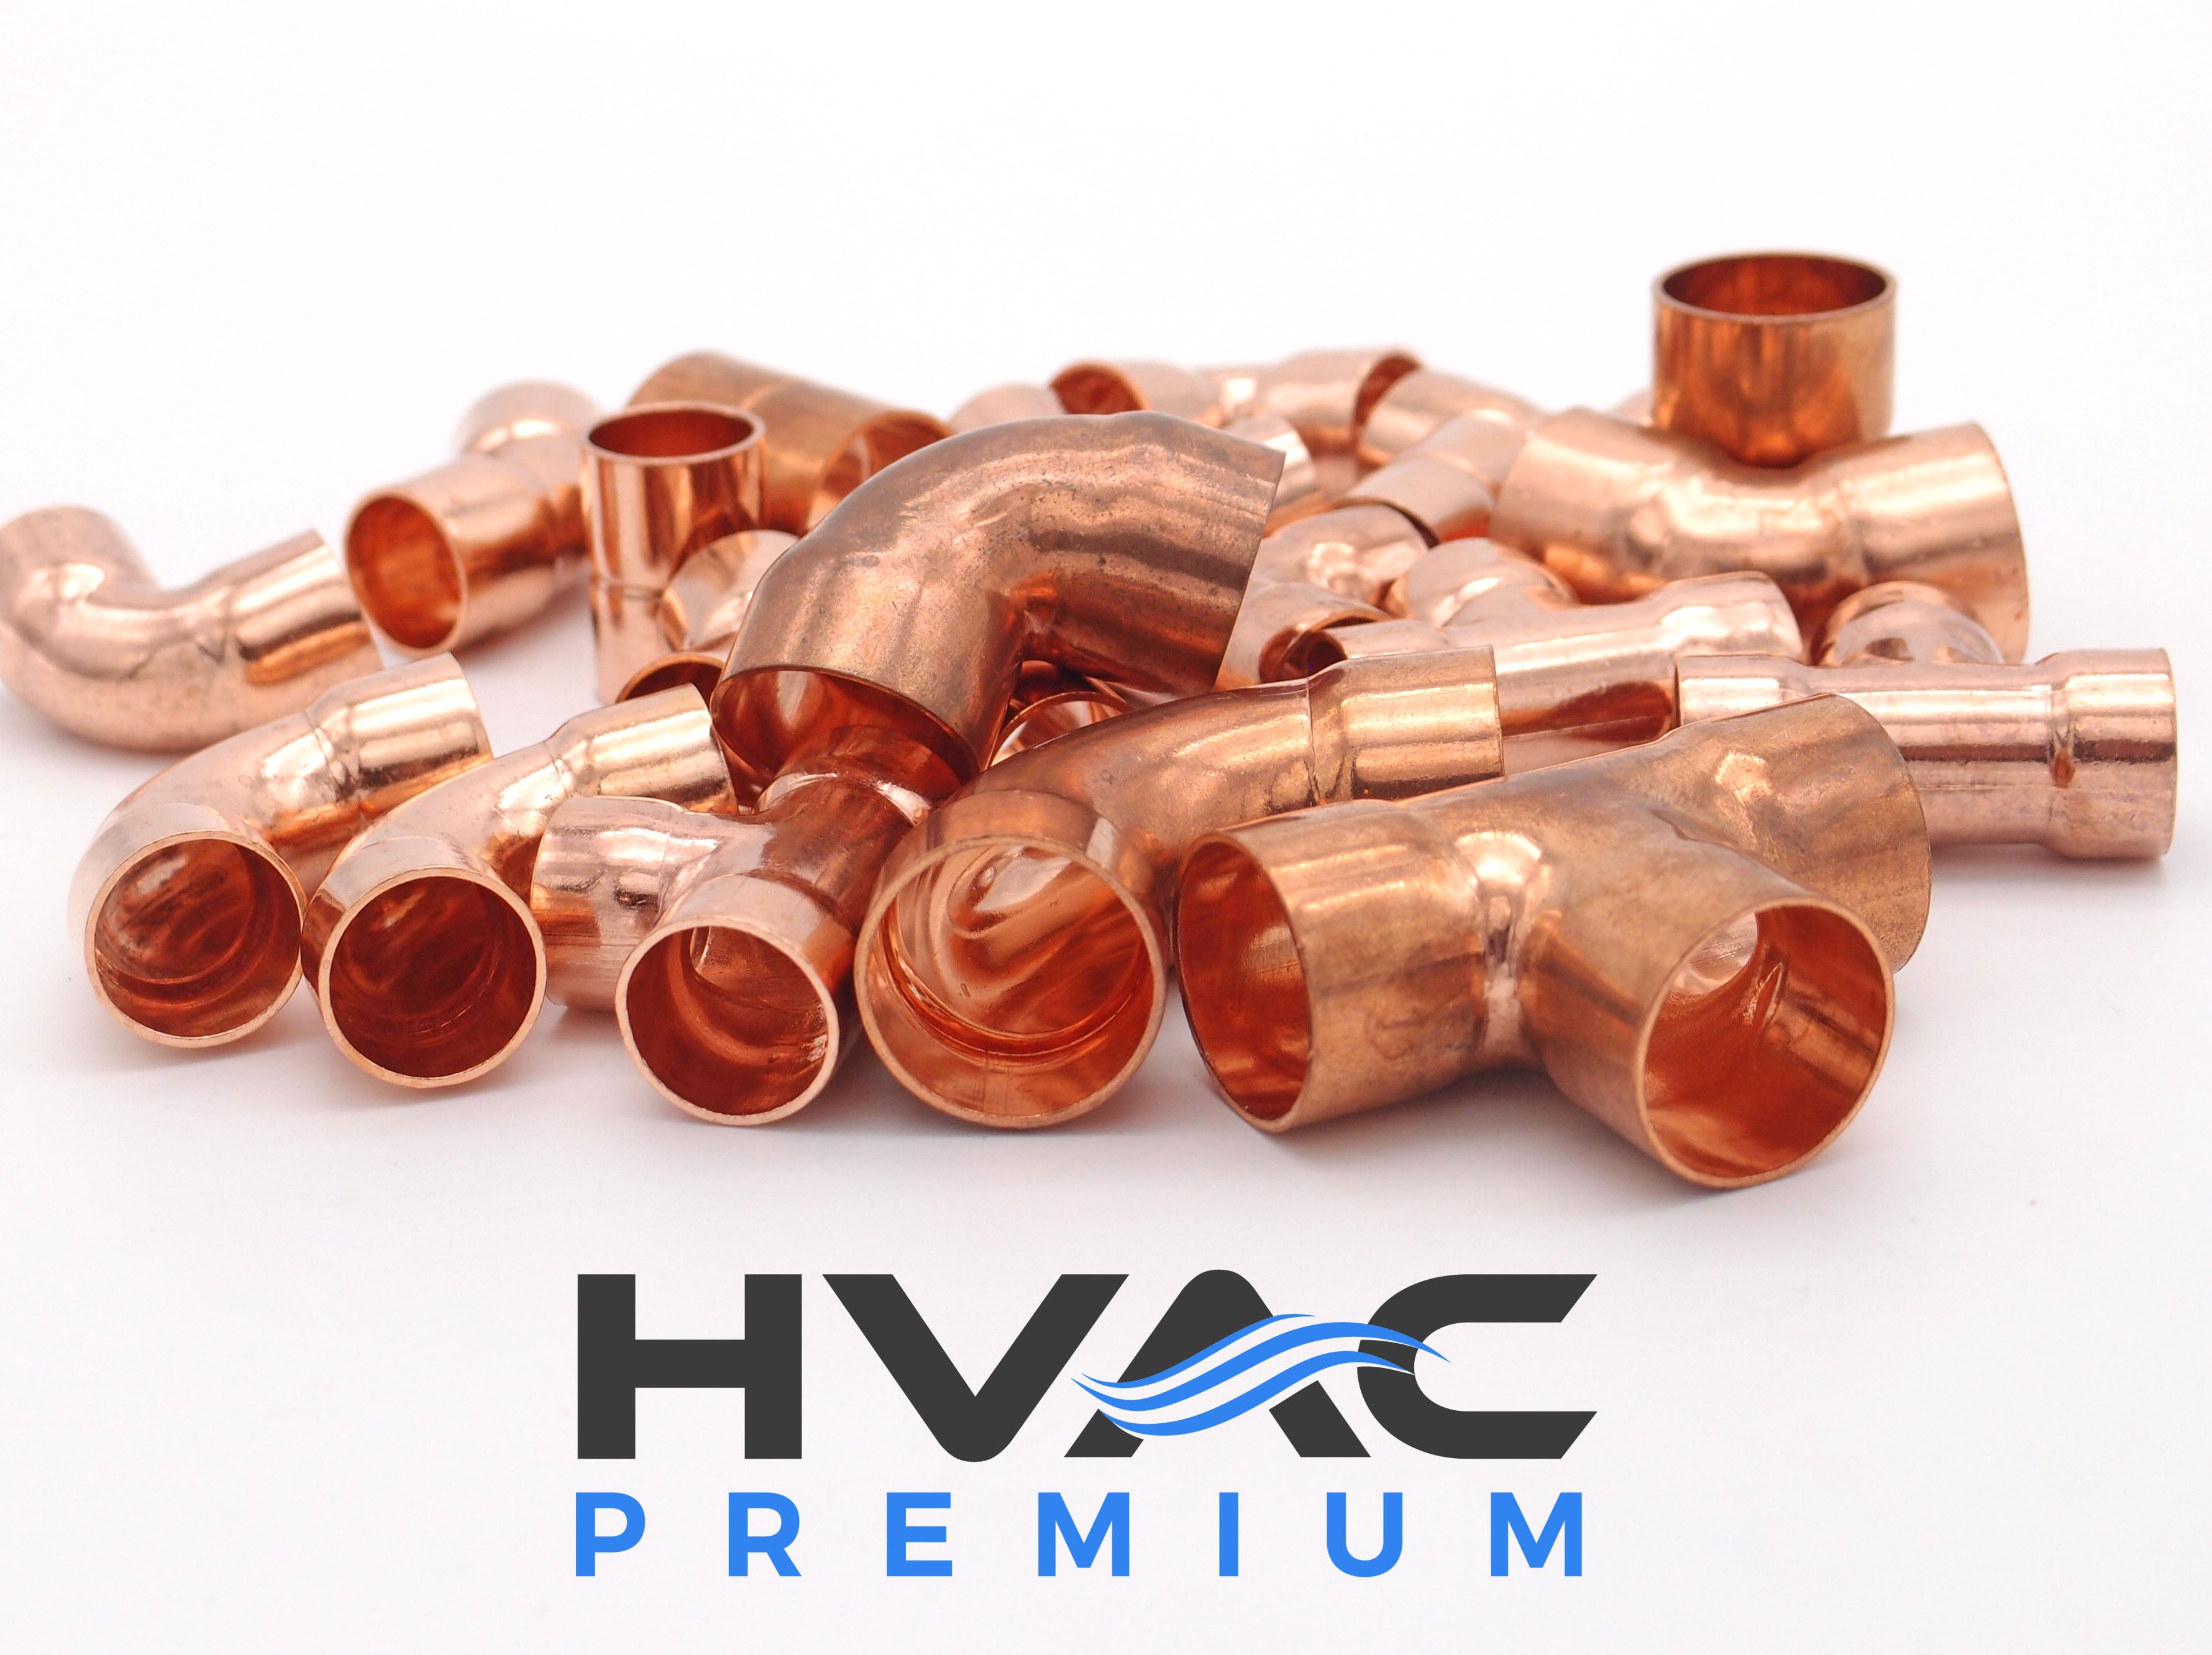 Copper Fitting 3/4 to 1/2 (HVAC Dimensions) Reducer / Increaser Copper Coupling & HVAC – 5/8 to 3/8 (Plumbing Inner Dimensions) 99.9% Pure Copper - 10 Pack